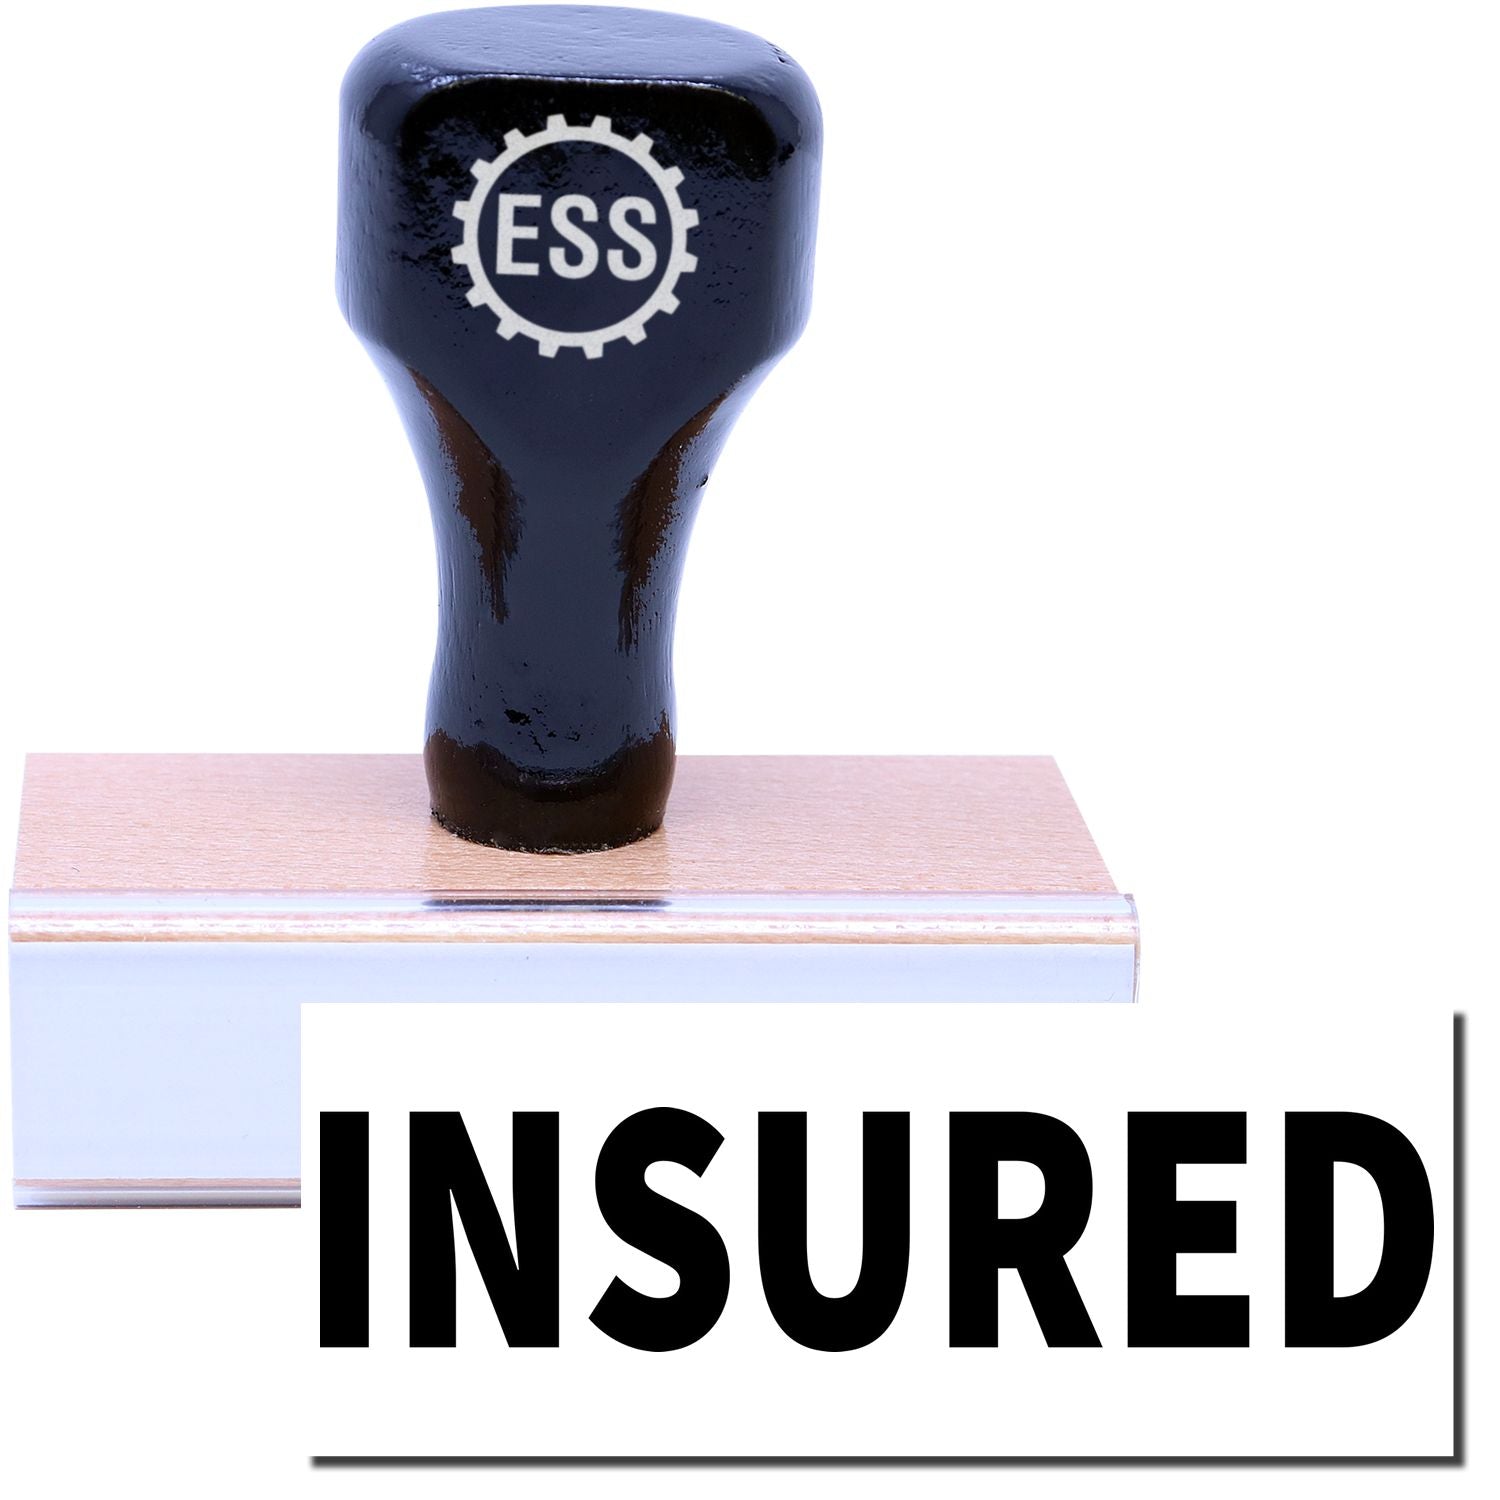 A stock office rubber stamp with a stamped image showing how the text "INSURED" in a large font is displayed after stamping.